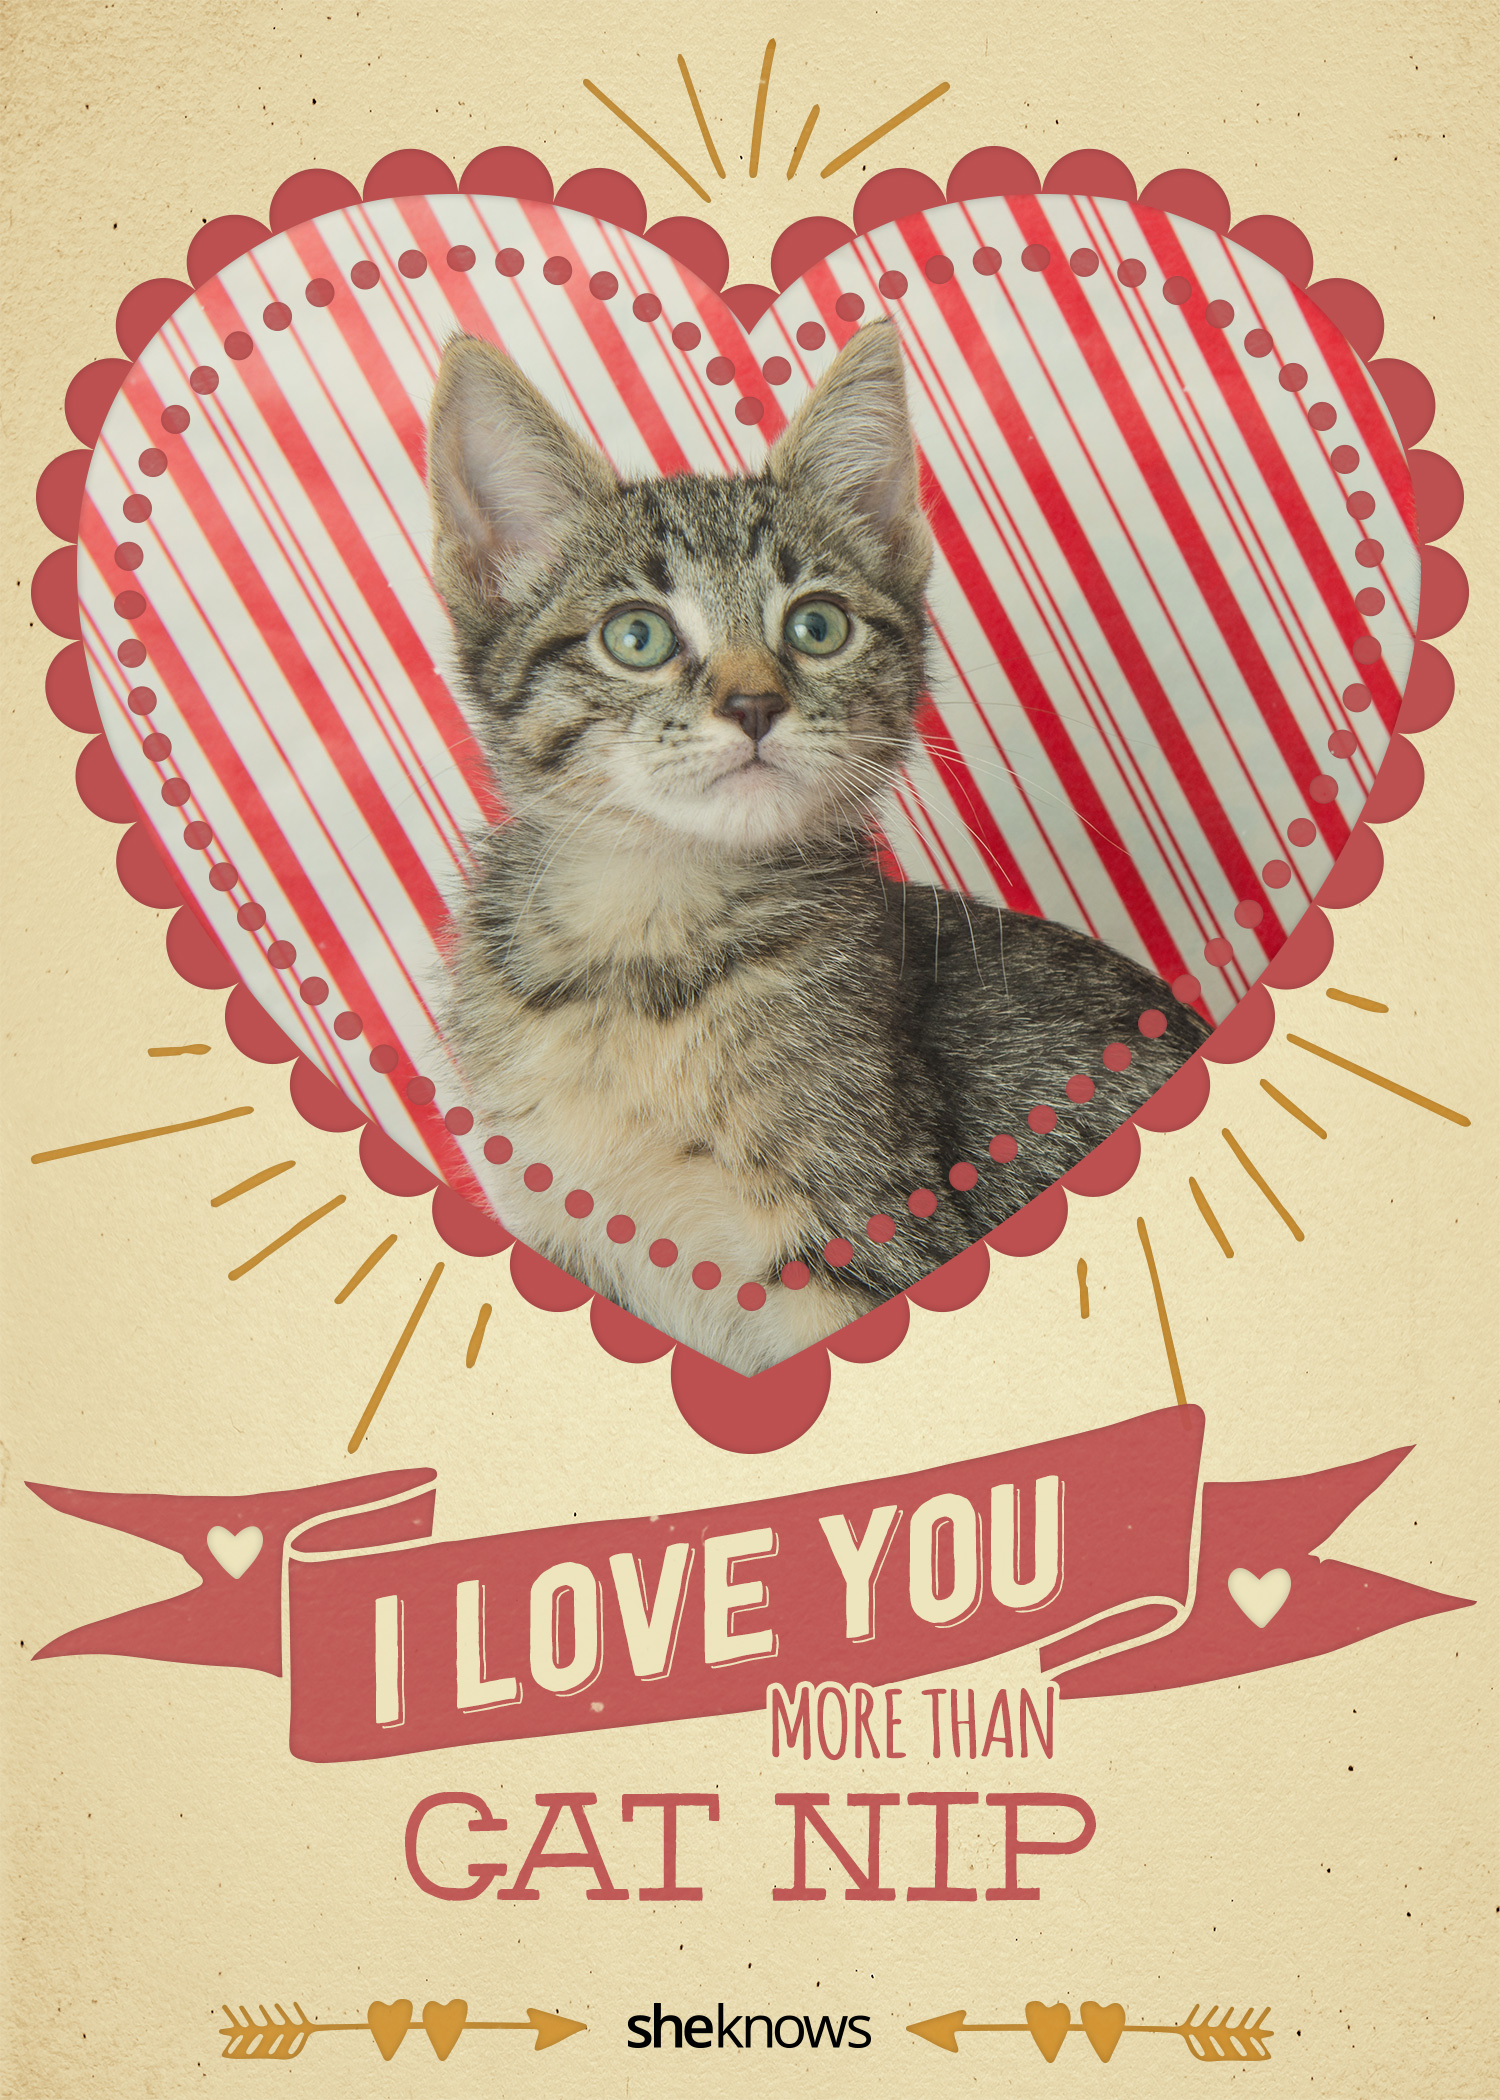 12 Kitty-cat Valentine's Day cards that will make you aww